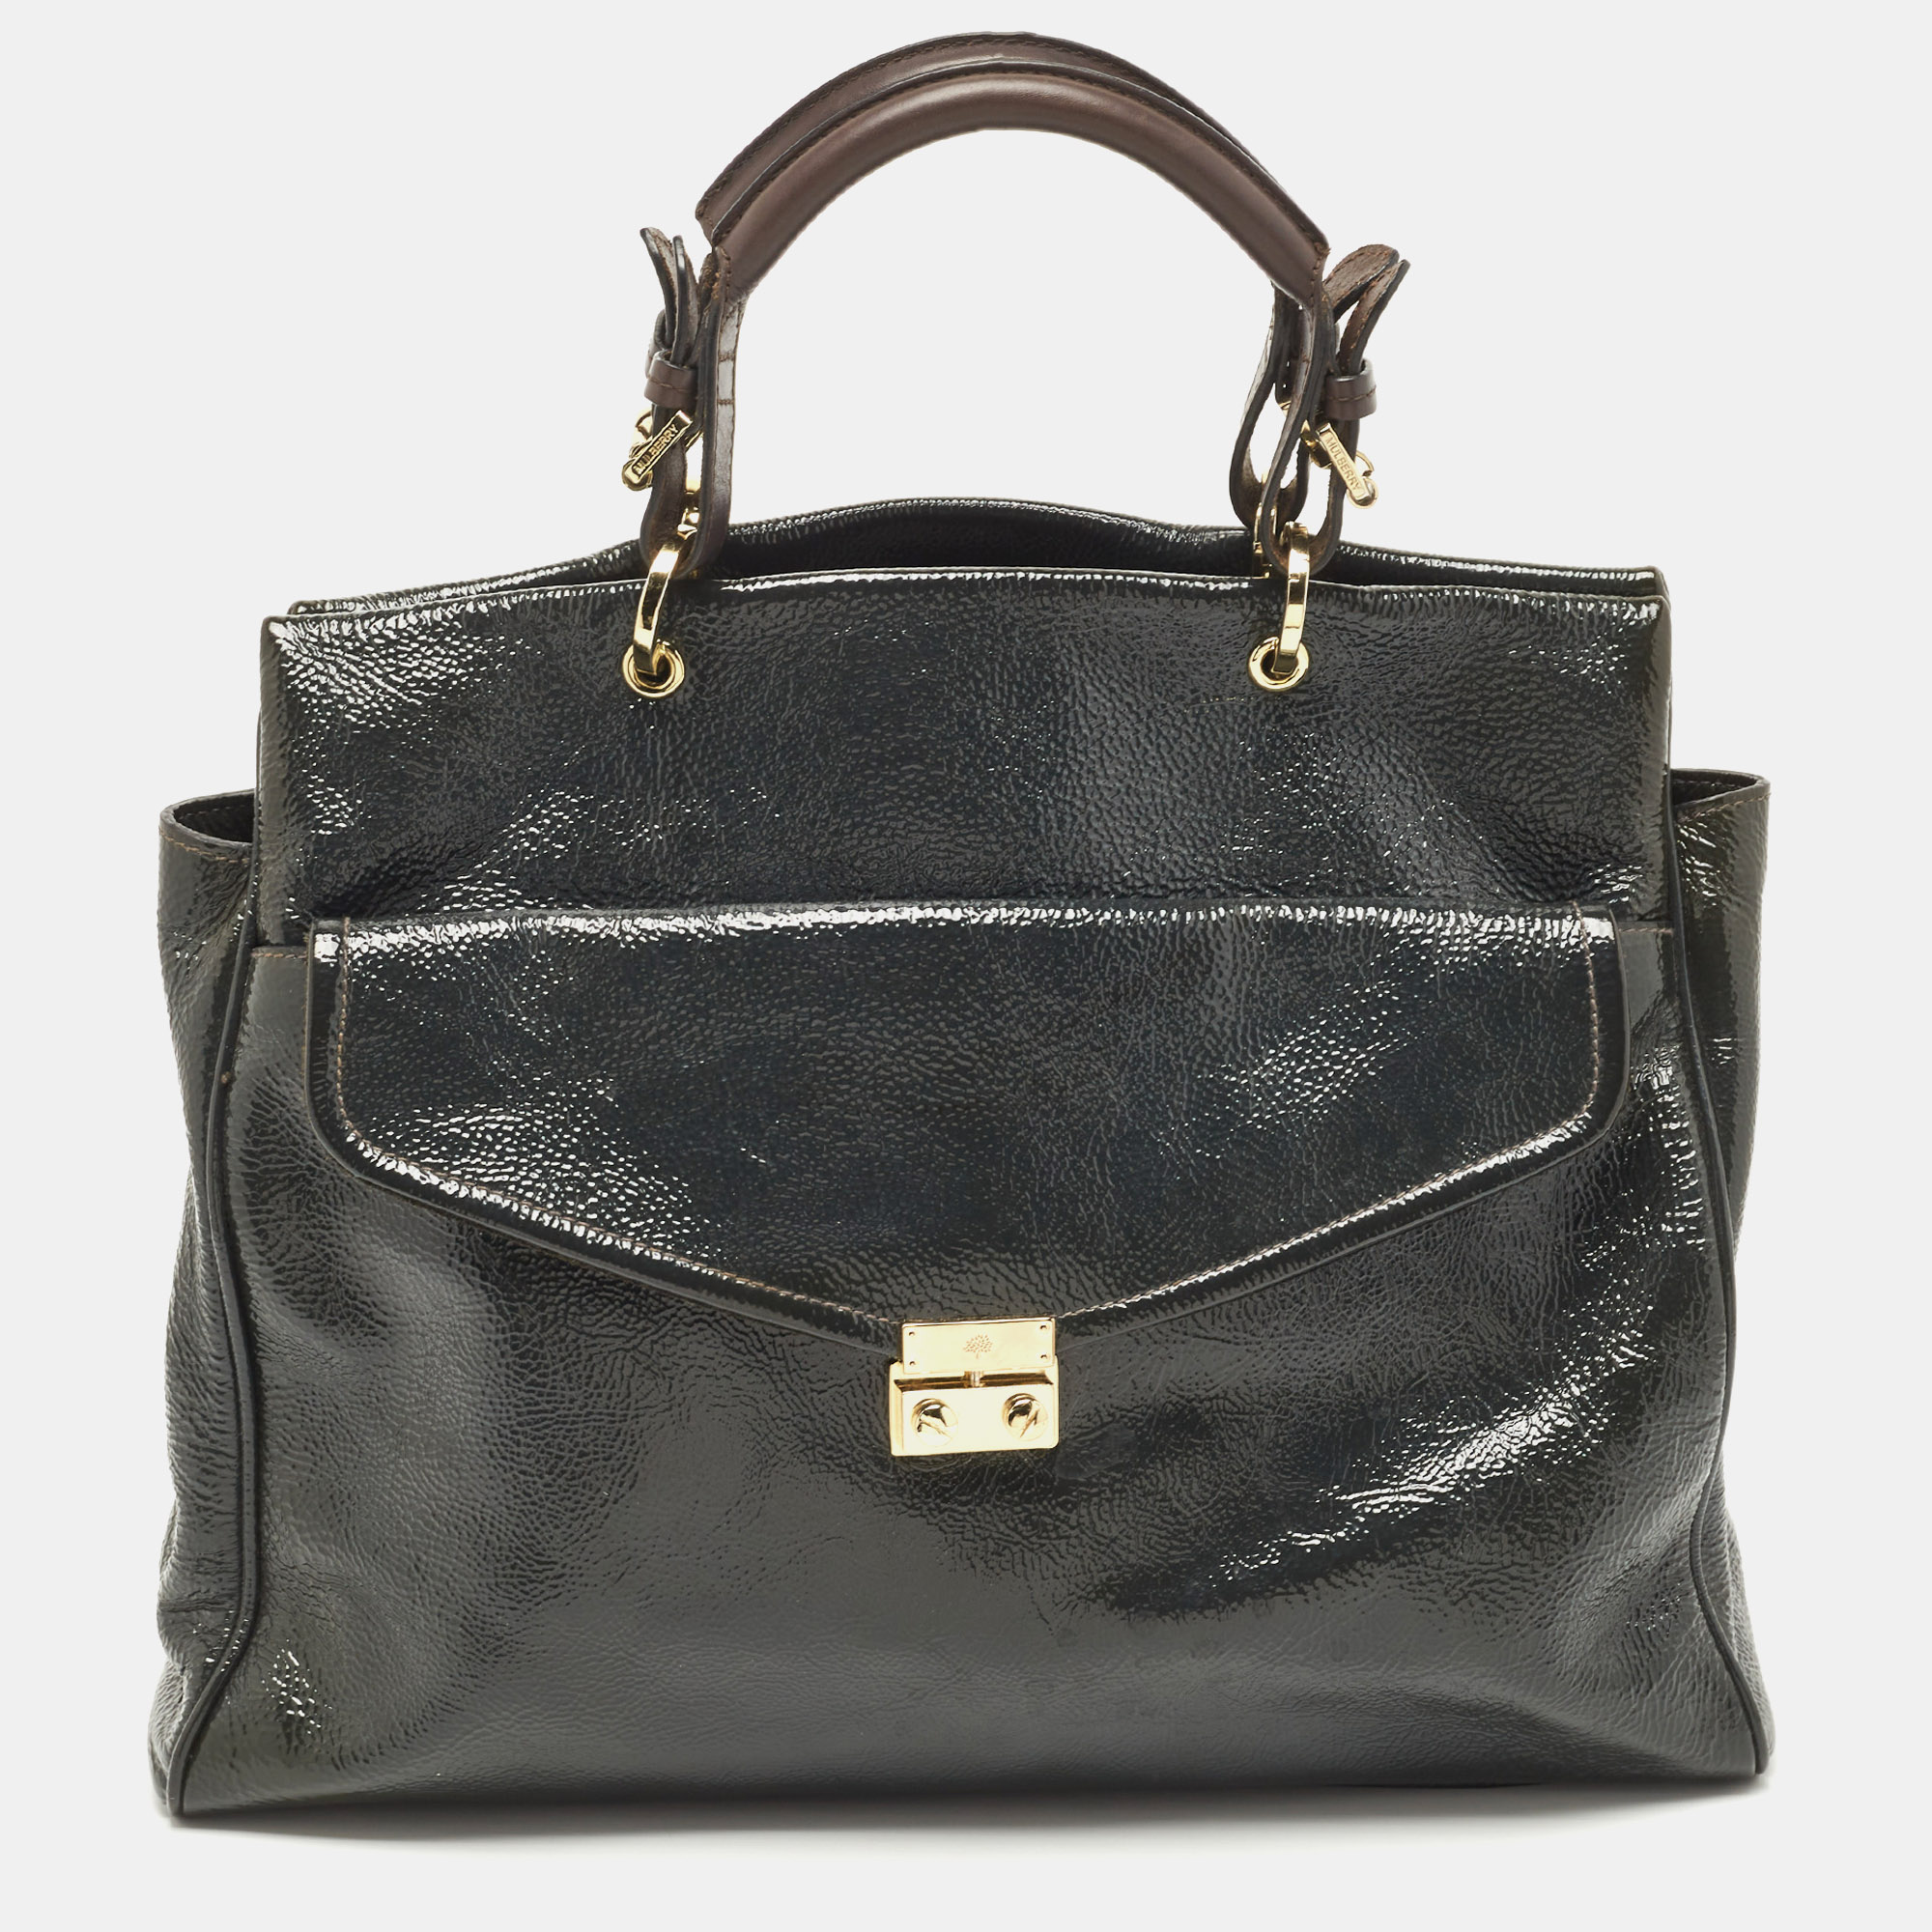 Mulberry Dark Grey Patent And Leather Neely Tote